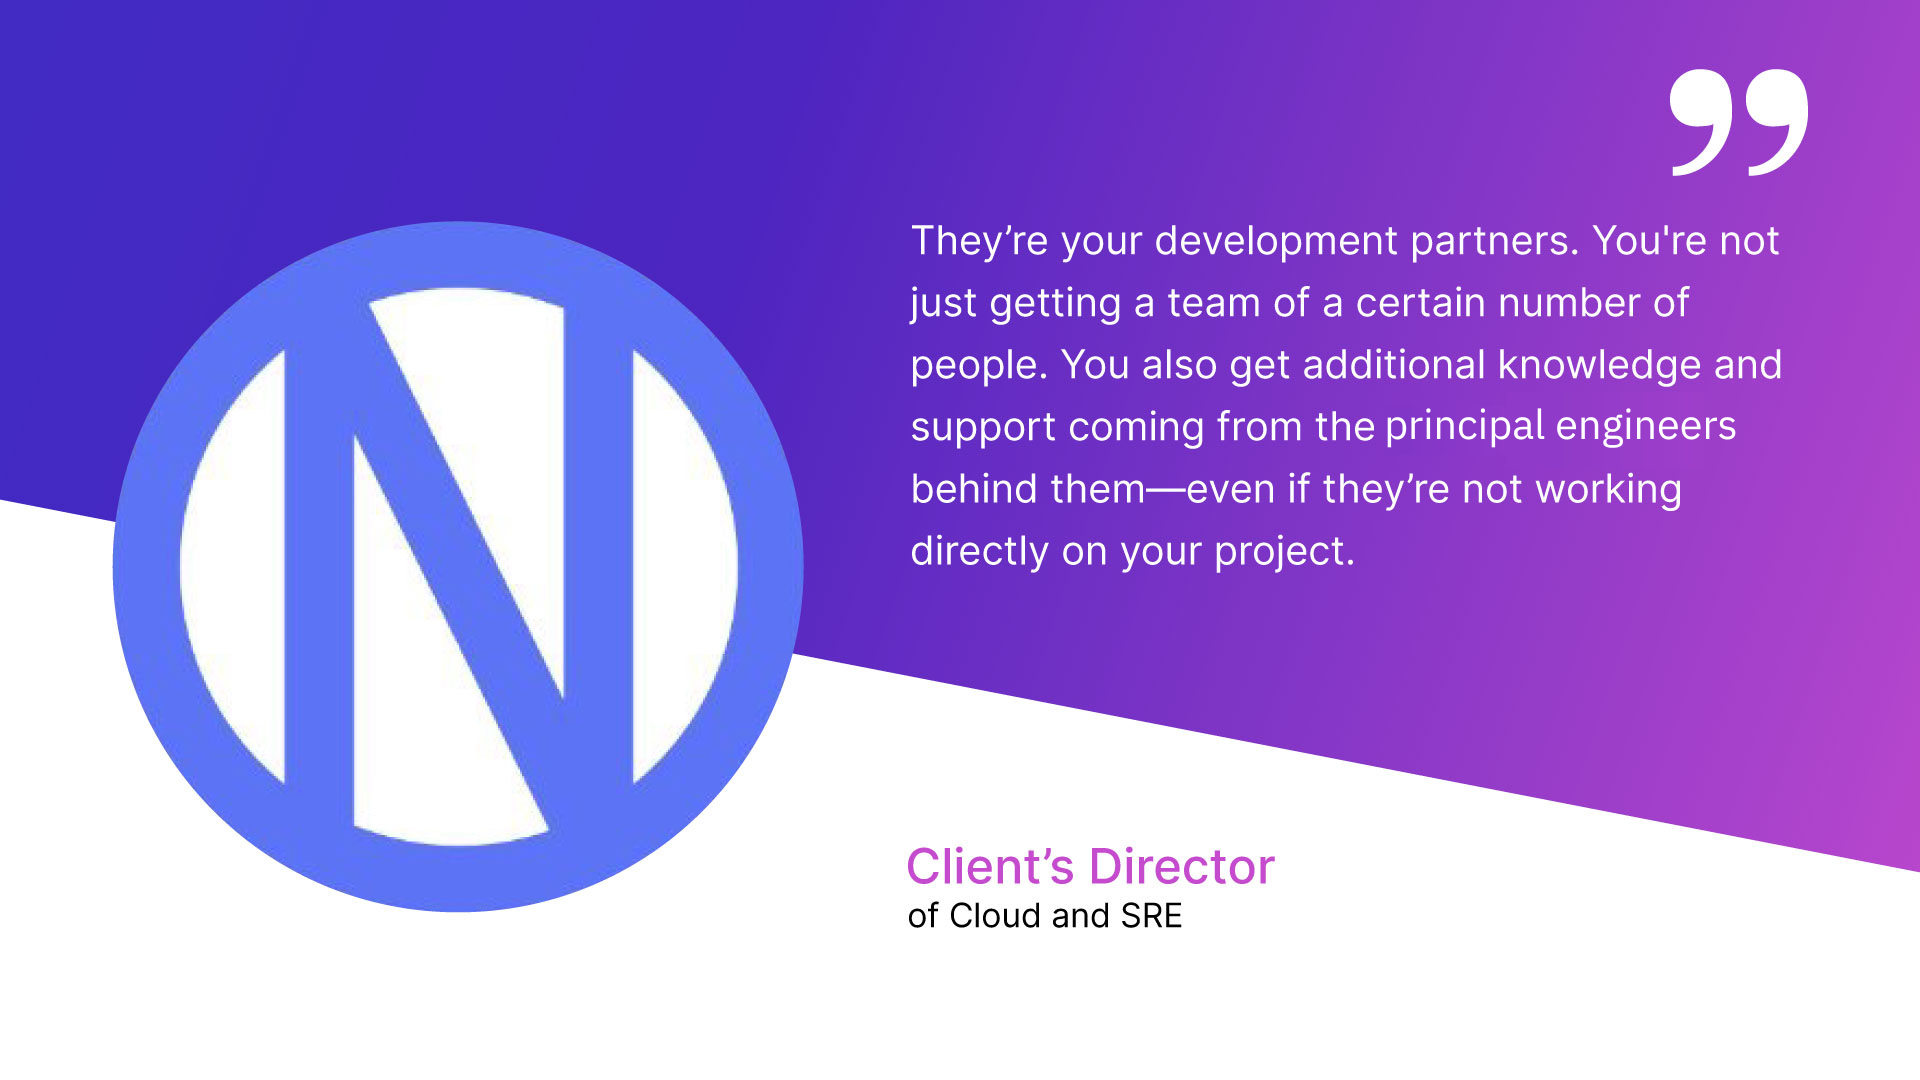 Quote by NaNLABS client’s director of cloud and sre